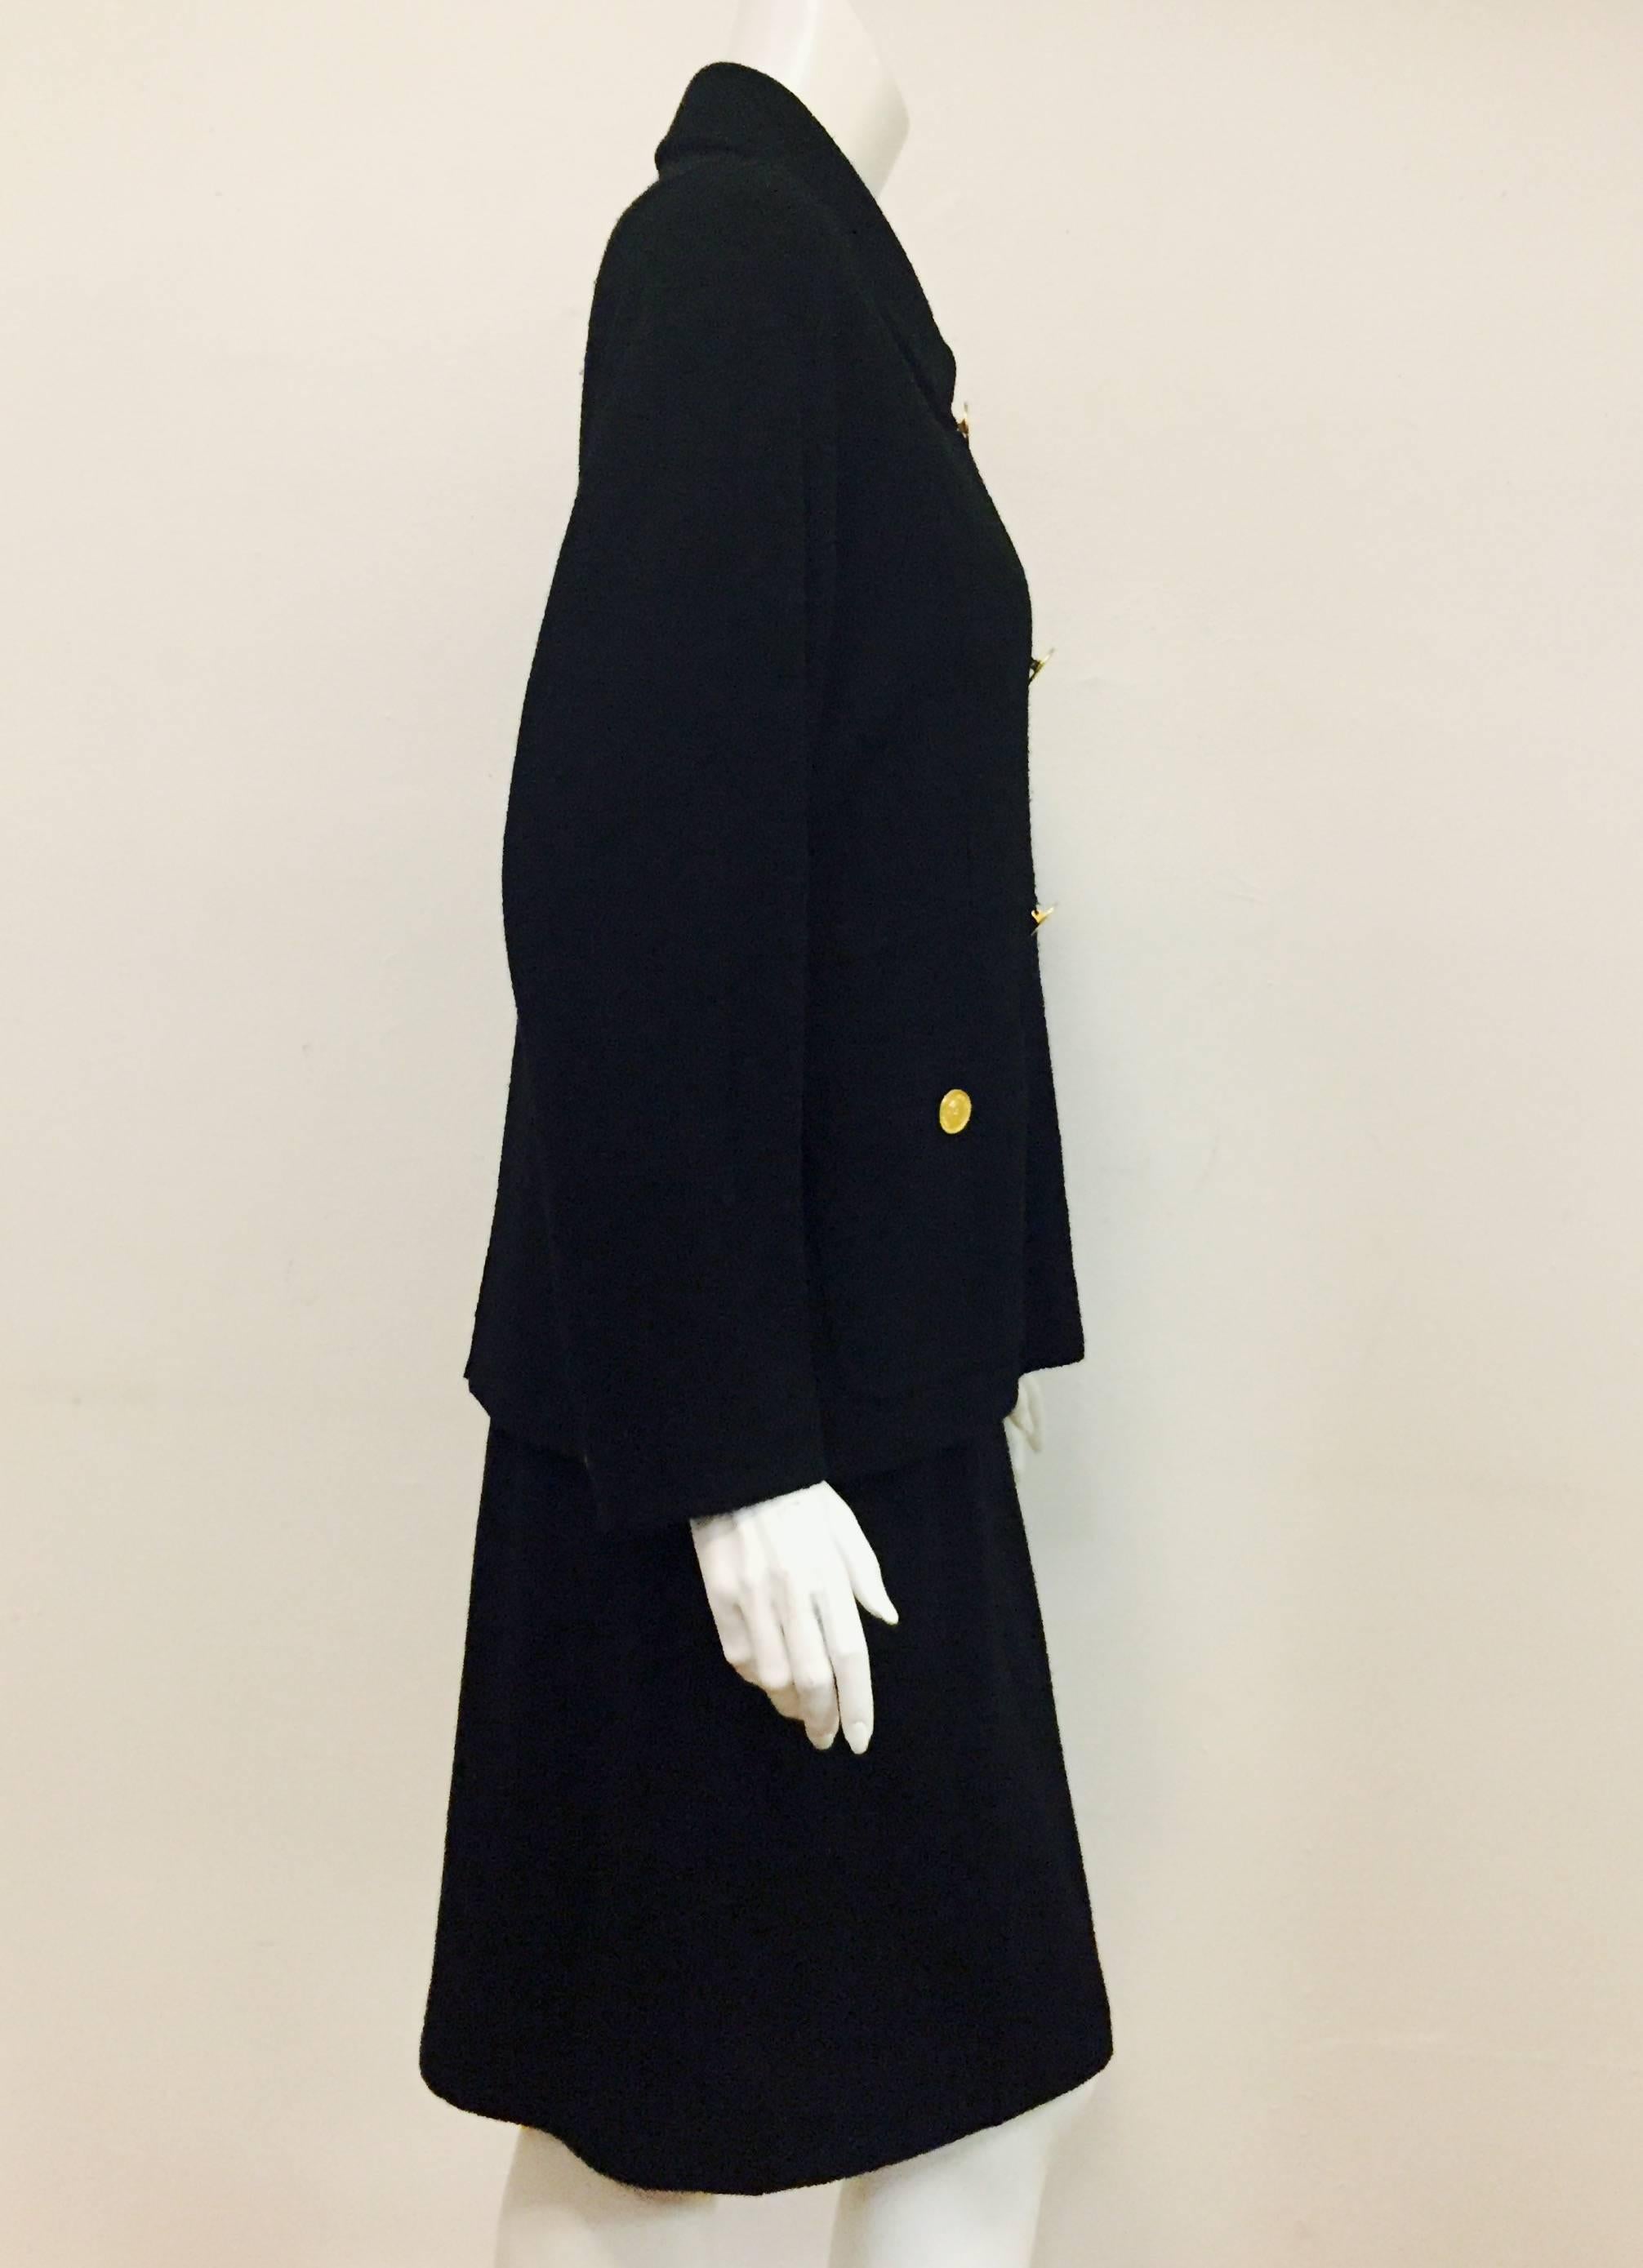 Vintage Chanel double breasted black wool suit with pointed collar and dolman sleeves.  Chanel tailleur set is highly detailed and crafted with two front slit pockets with gold buttons, as well as at the cuff of the dolman sleeves.   6-button double